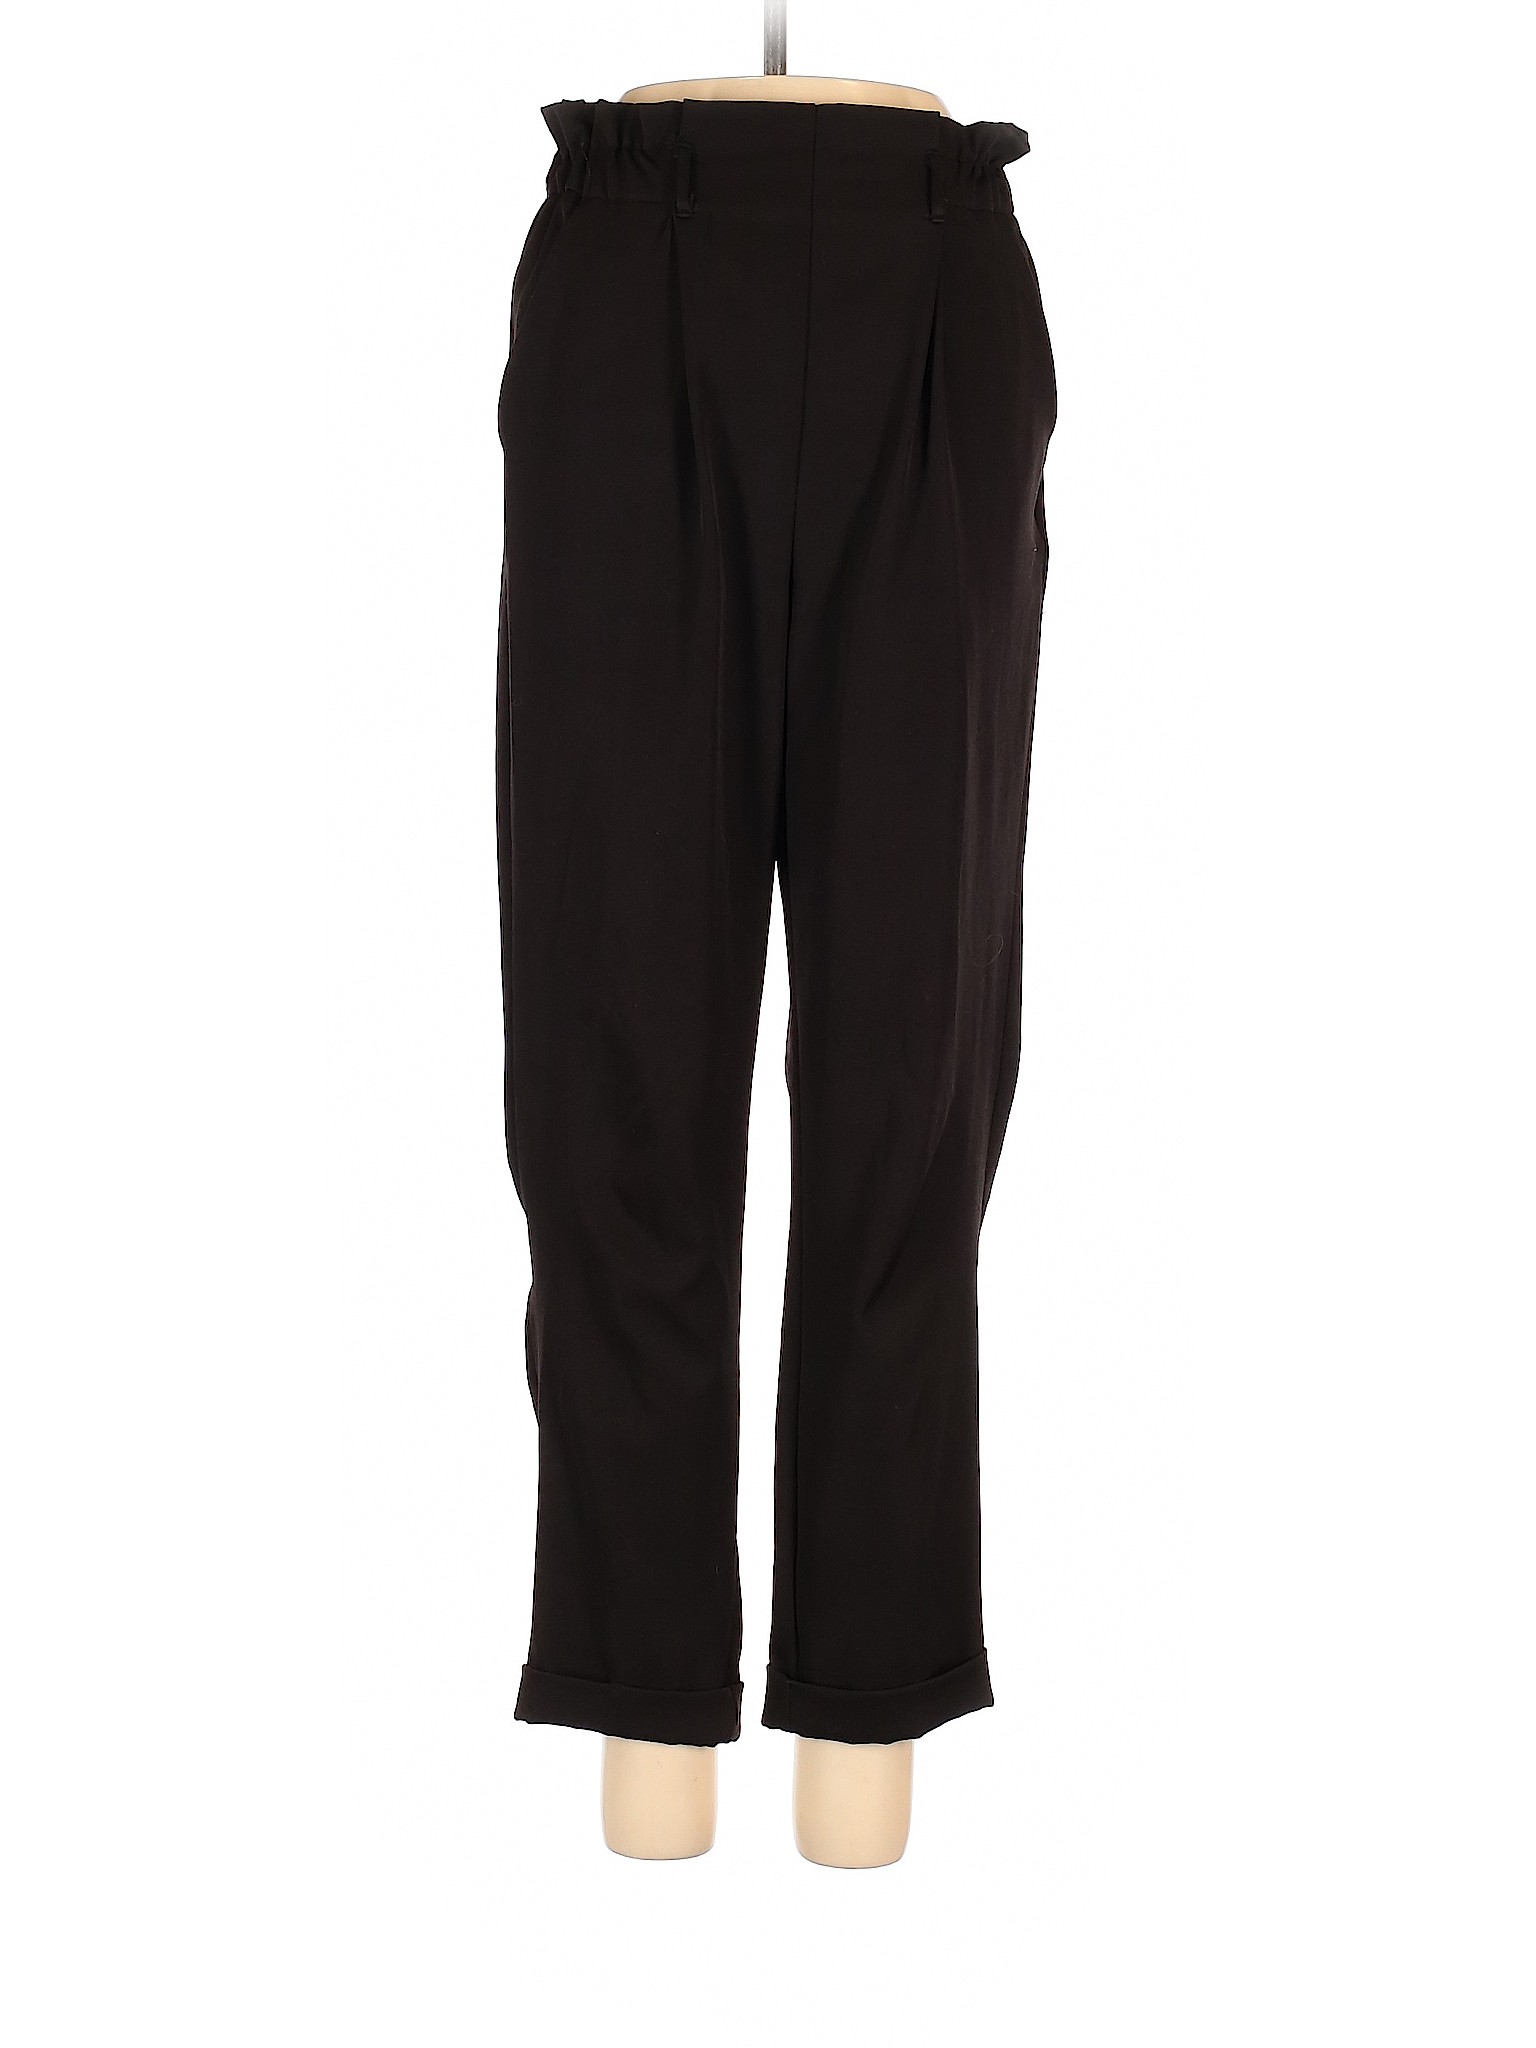 Sienna Sky Solid Black Casual Pants Size XS - 91% off | thredUP